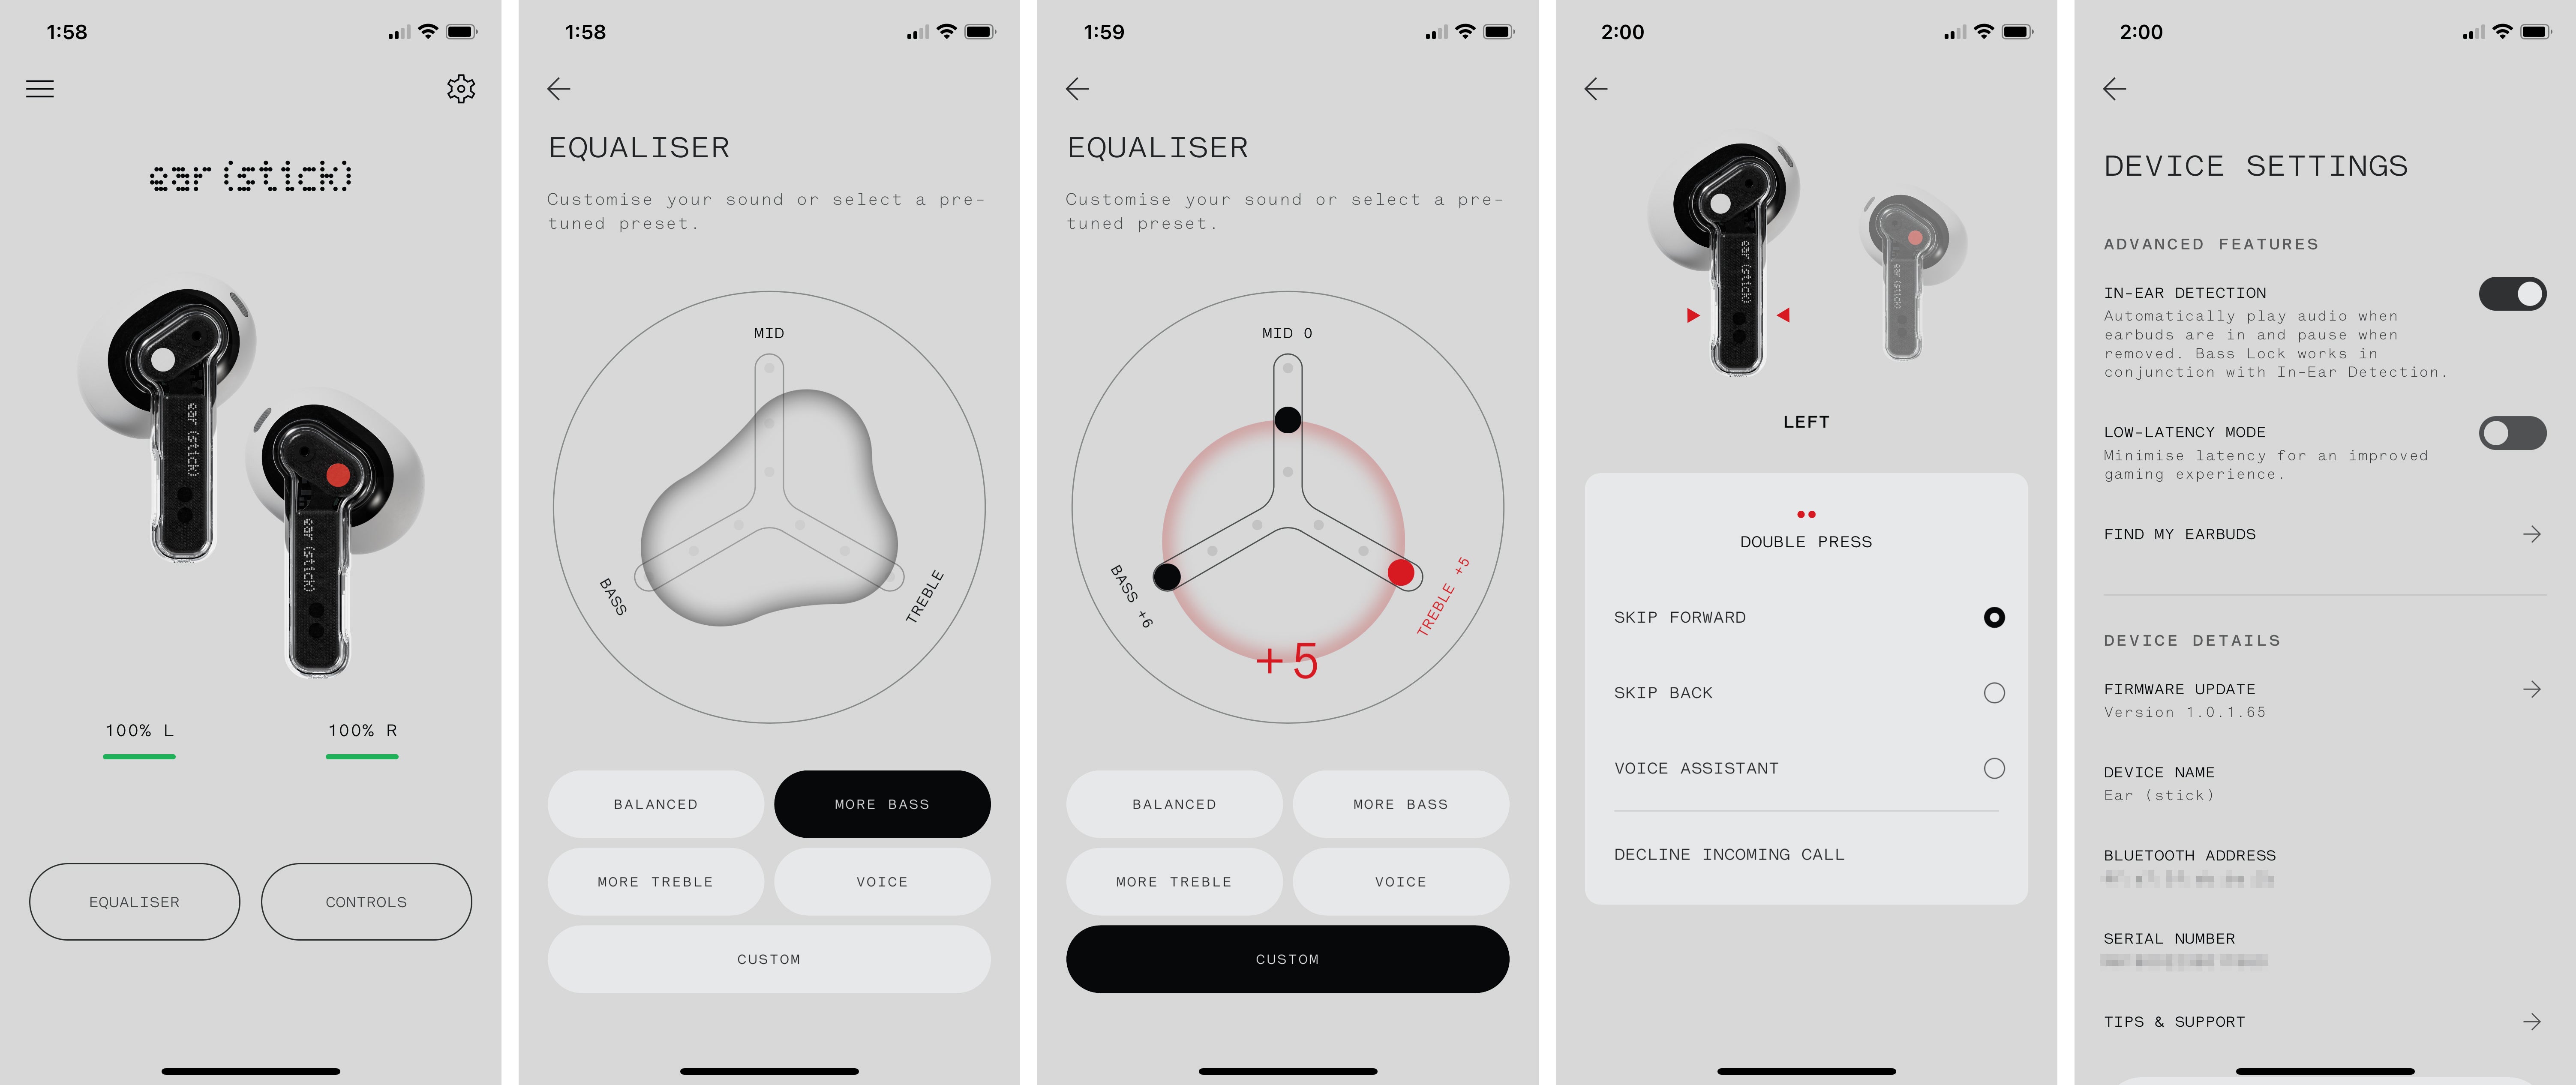 The Nothing X app allows the sound and functionality of the Ear (stick) to be customised in a limited fashion. (Screenshot: Andrew Liszewski | Gizmodo)